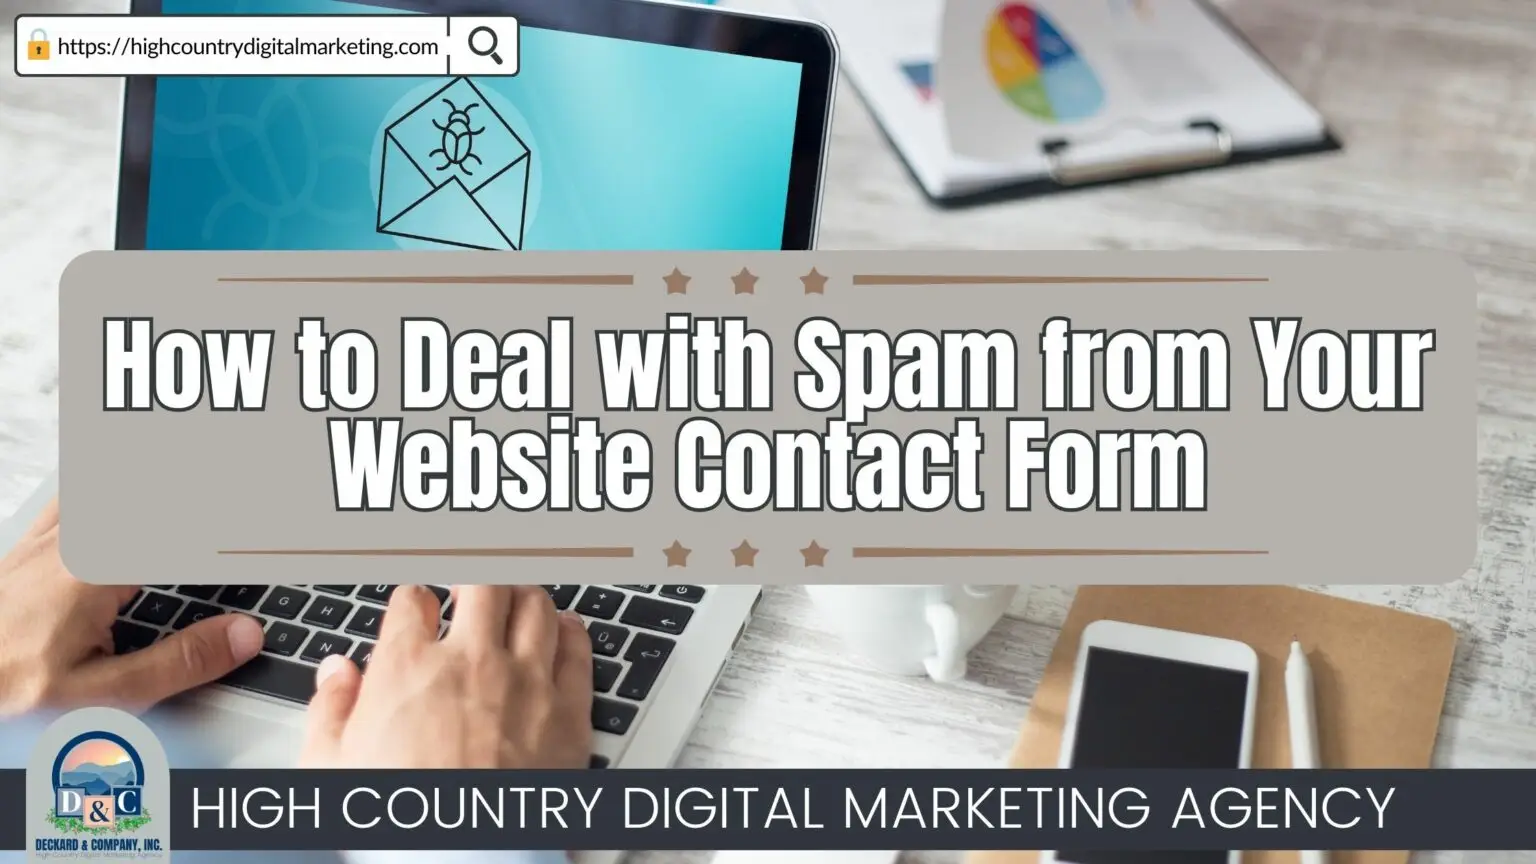 How to Deal with Spam from Your Website Contact Form with Deckard & Company and High Country Digital Marketing!